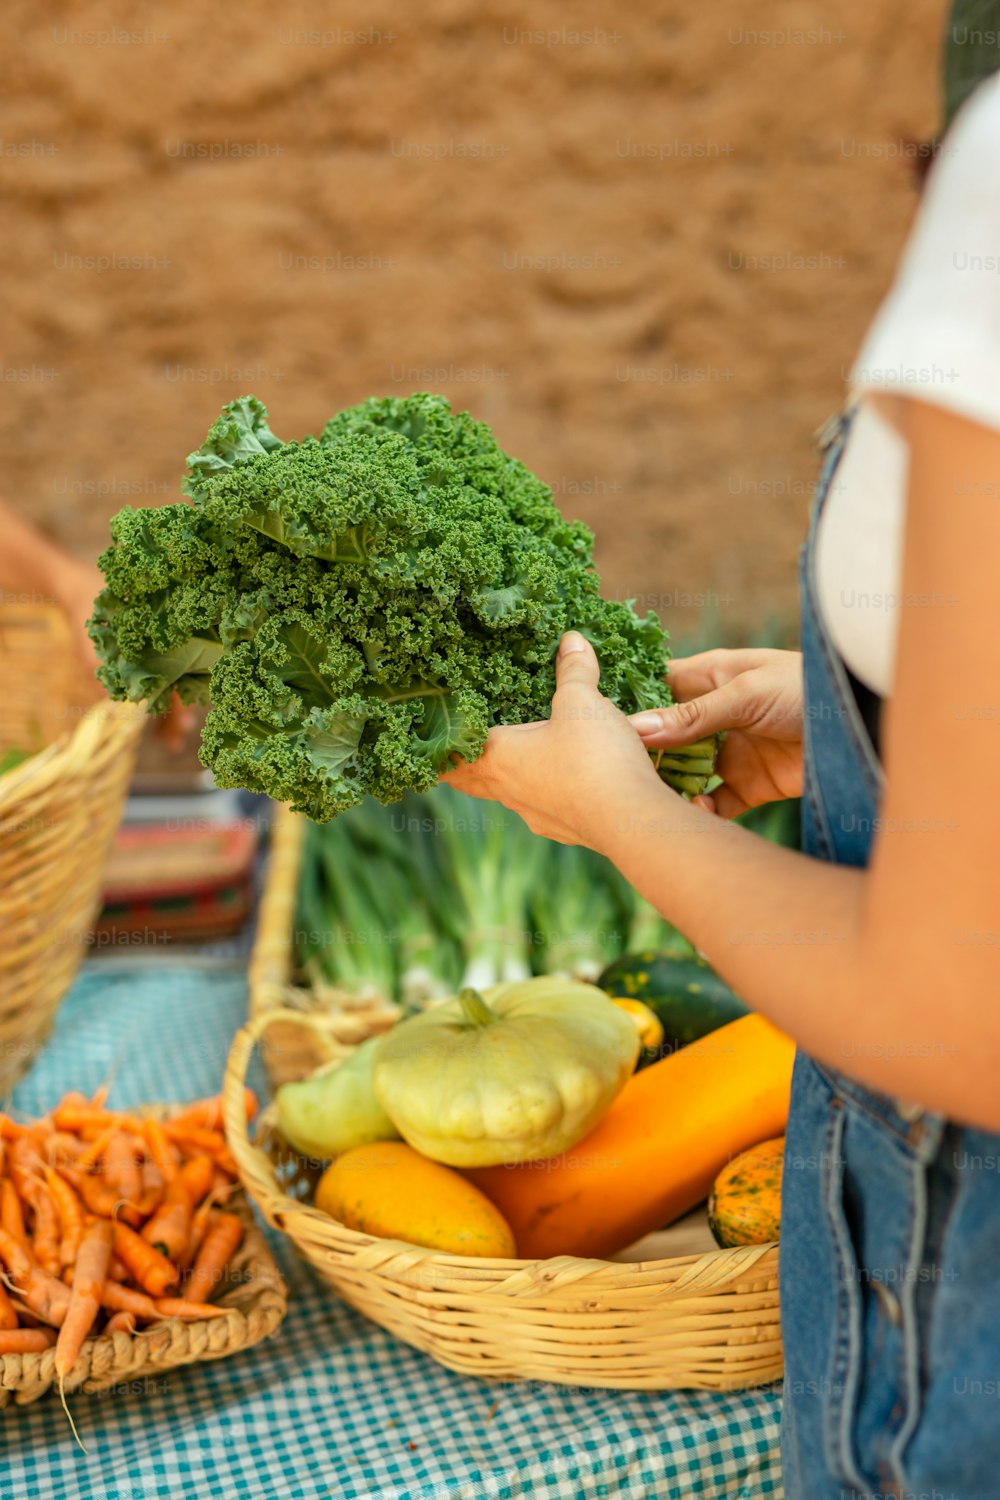 a woman holding a bunch of broccoli over a basket of carrots